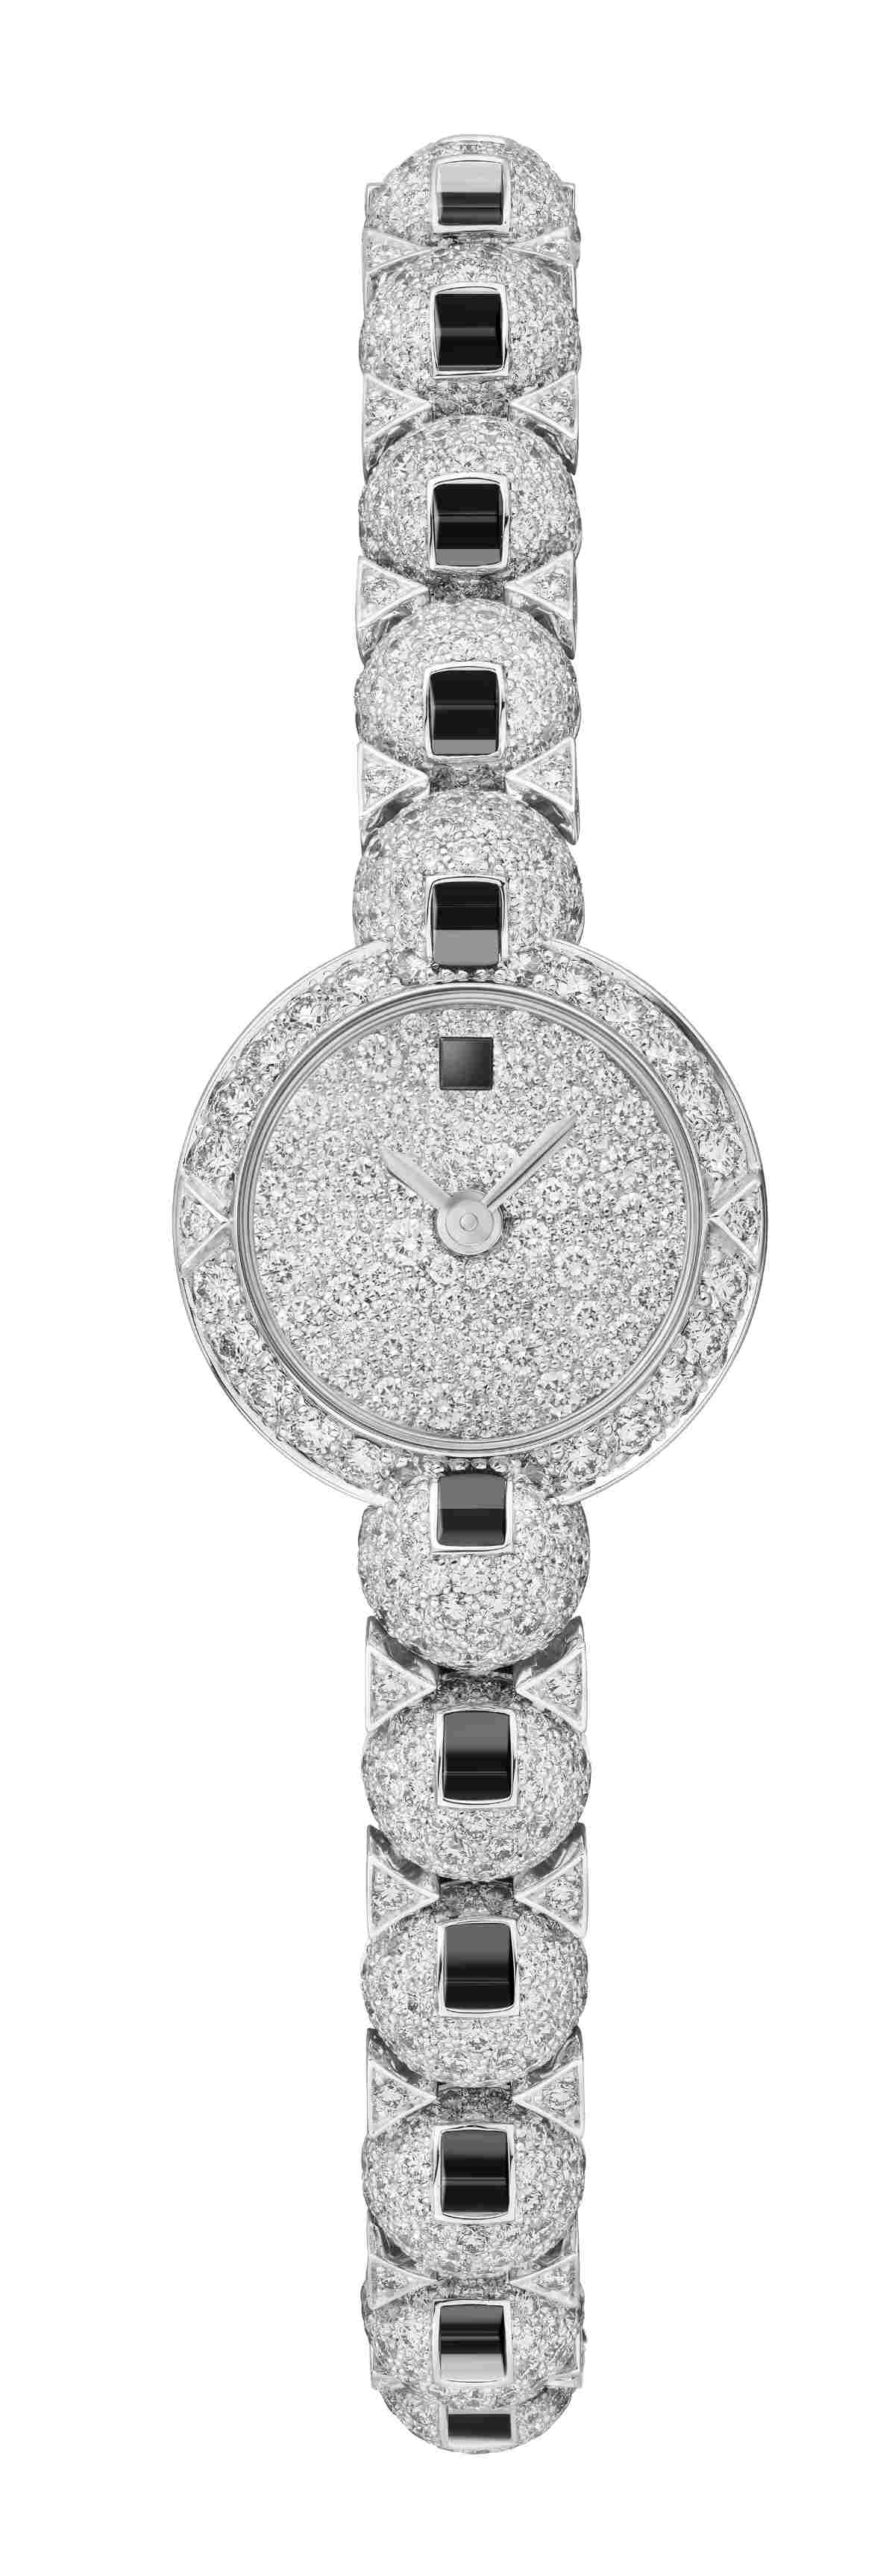 Pre-Watches & Wonders 2021: Cartier's Precious Watches